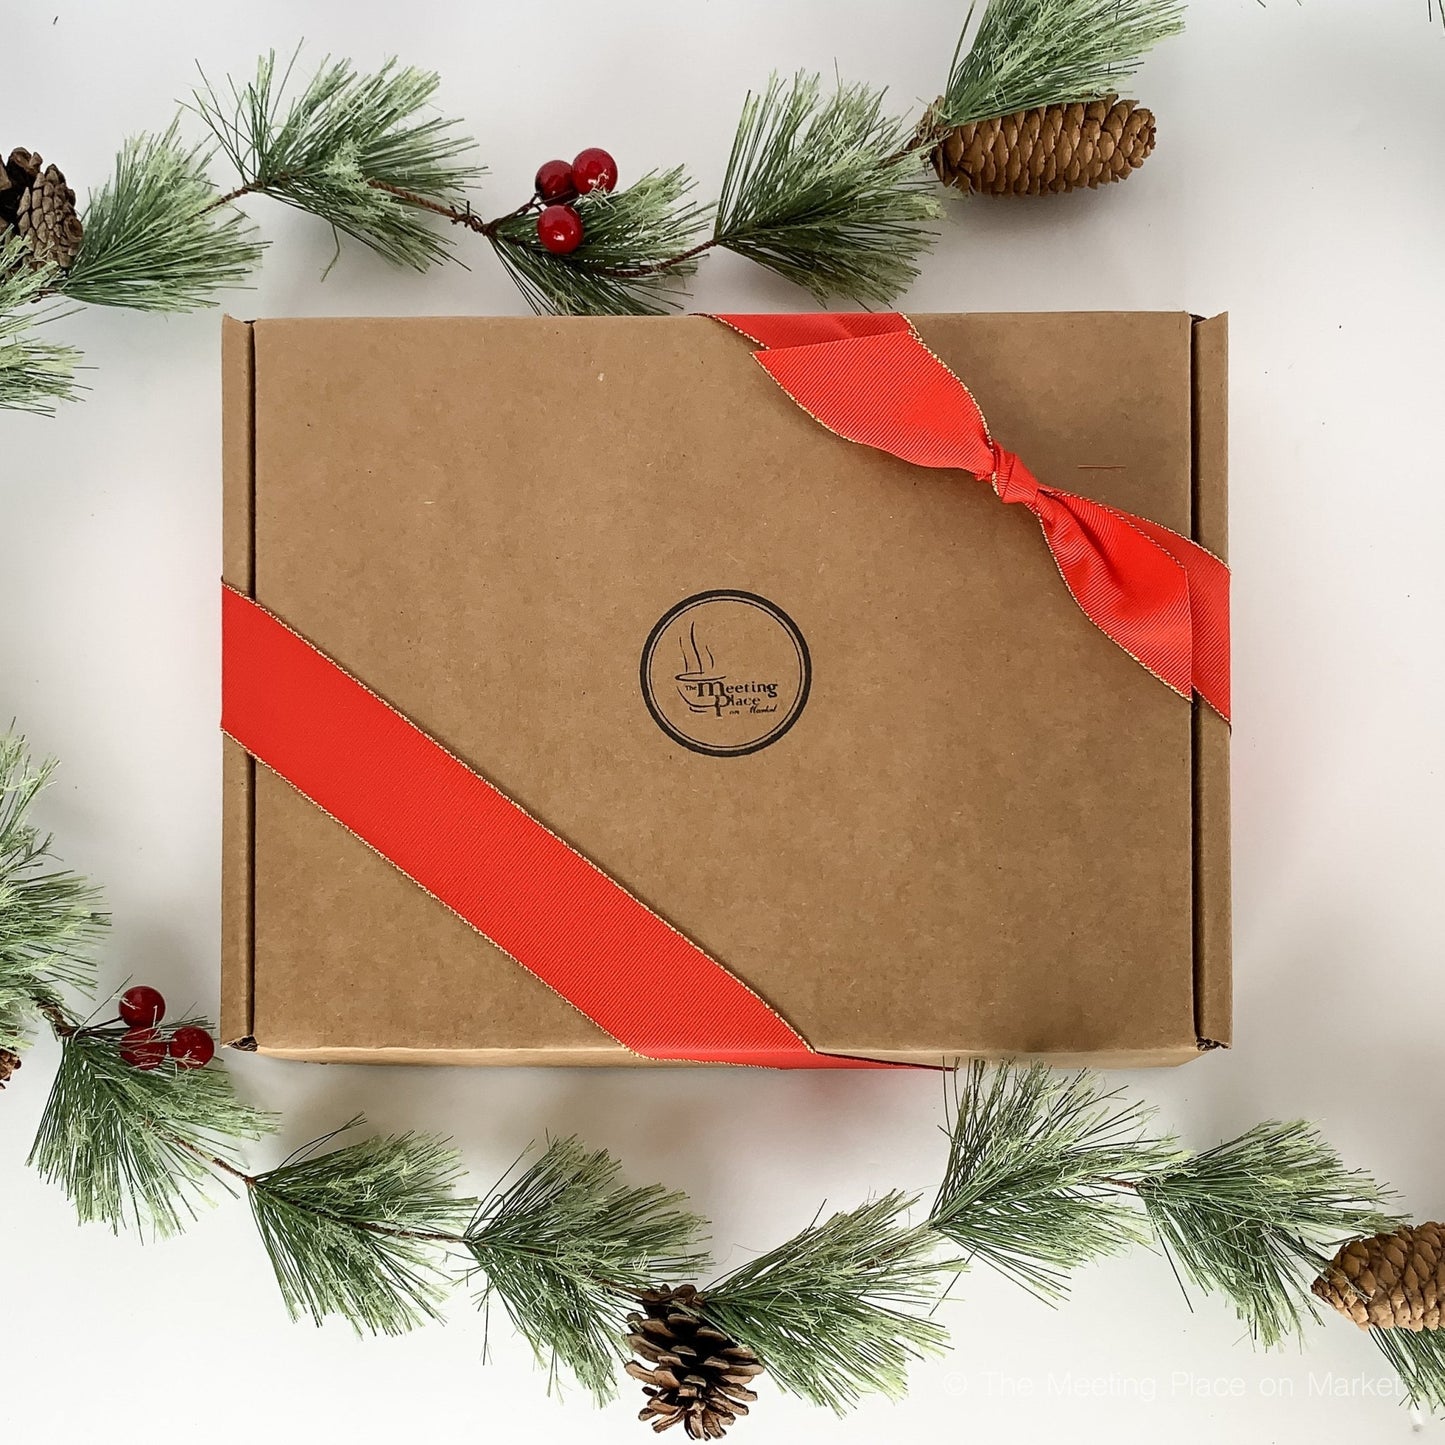 Christmas Coffee Break Gift Box Christmas Gift Basket - The Meeting Place on Market